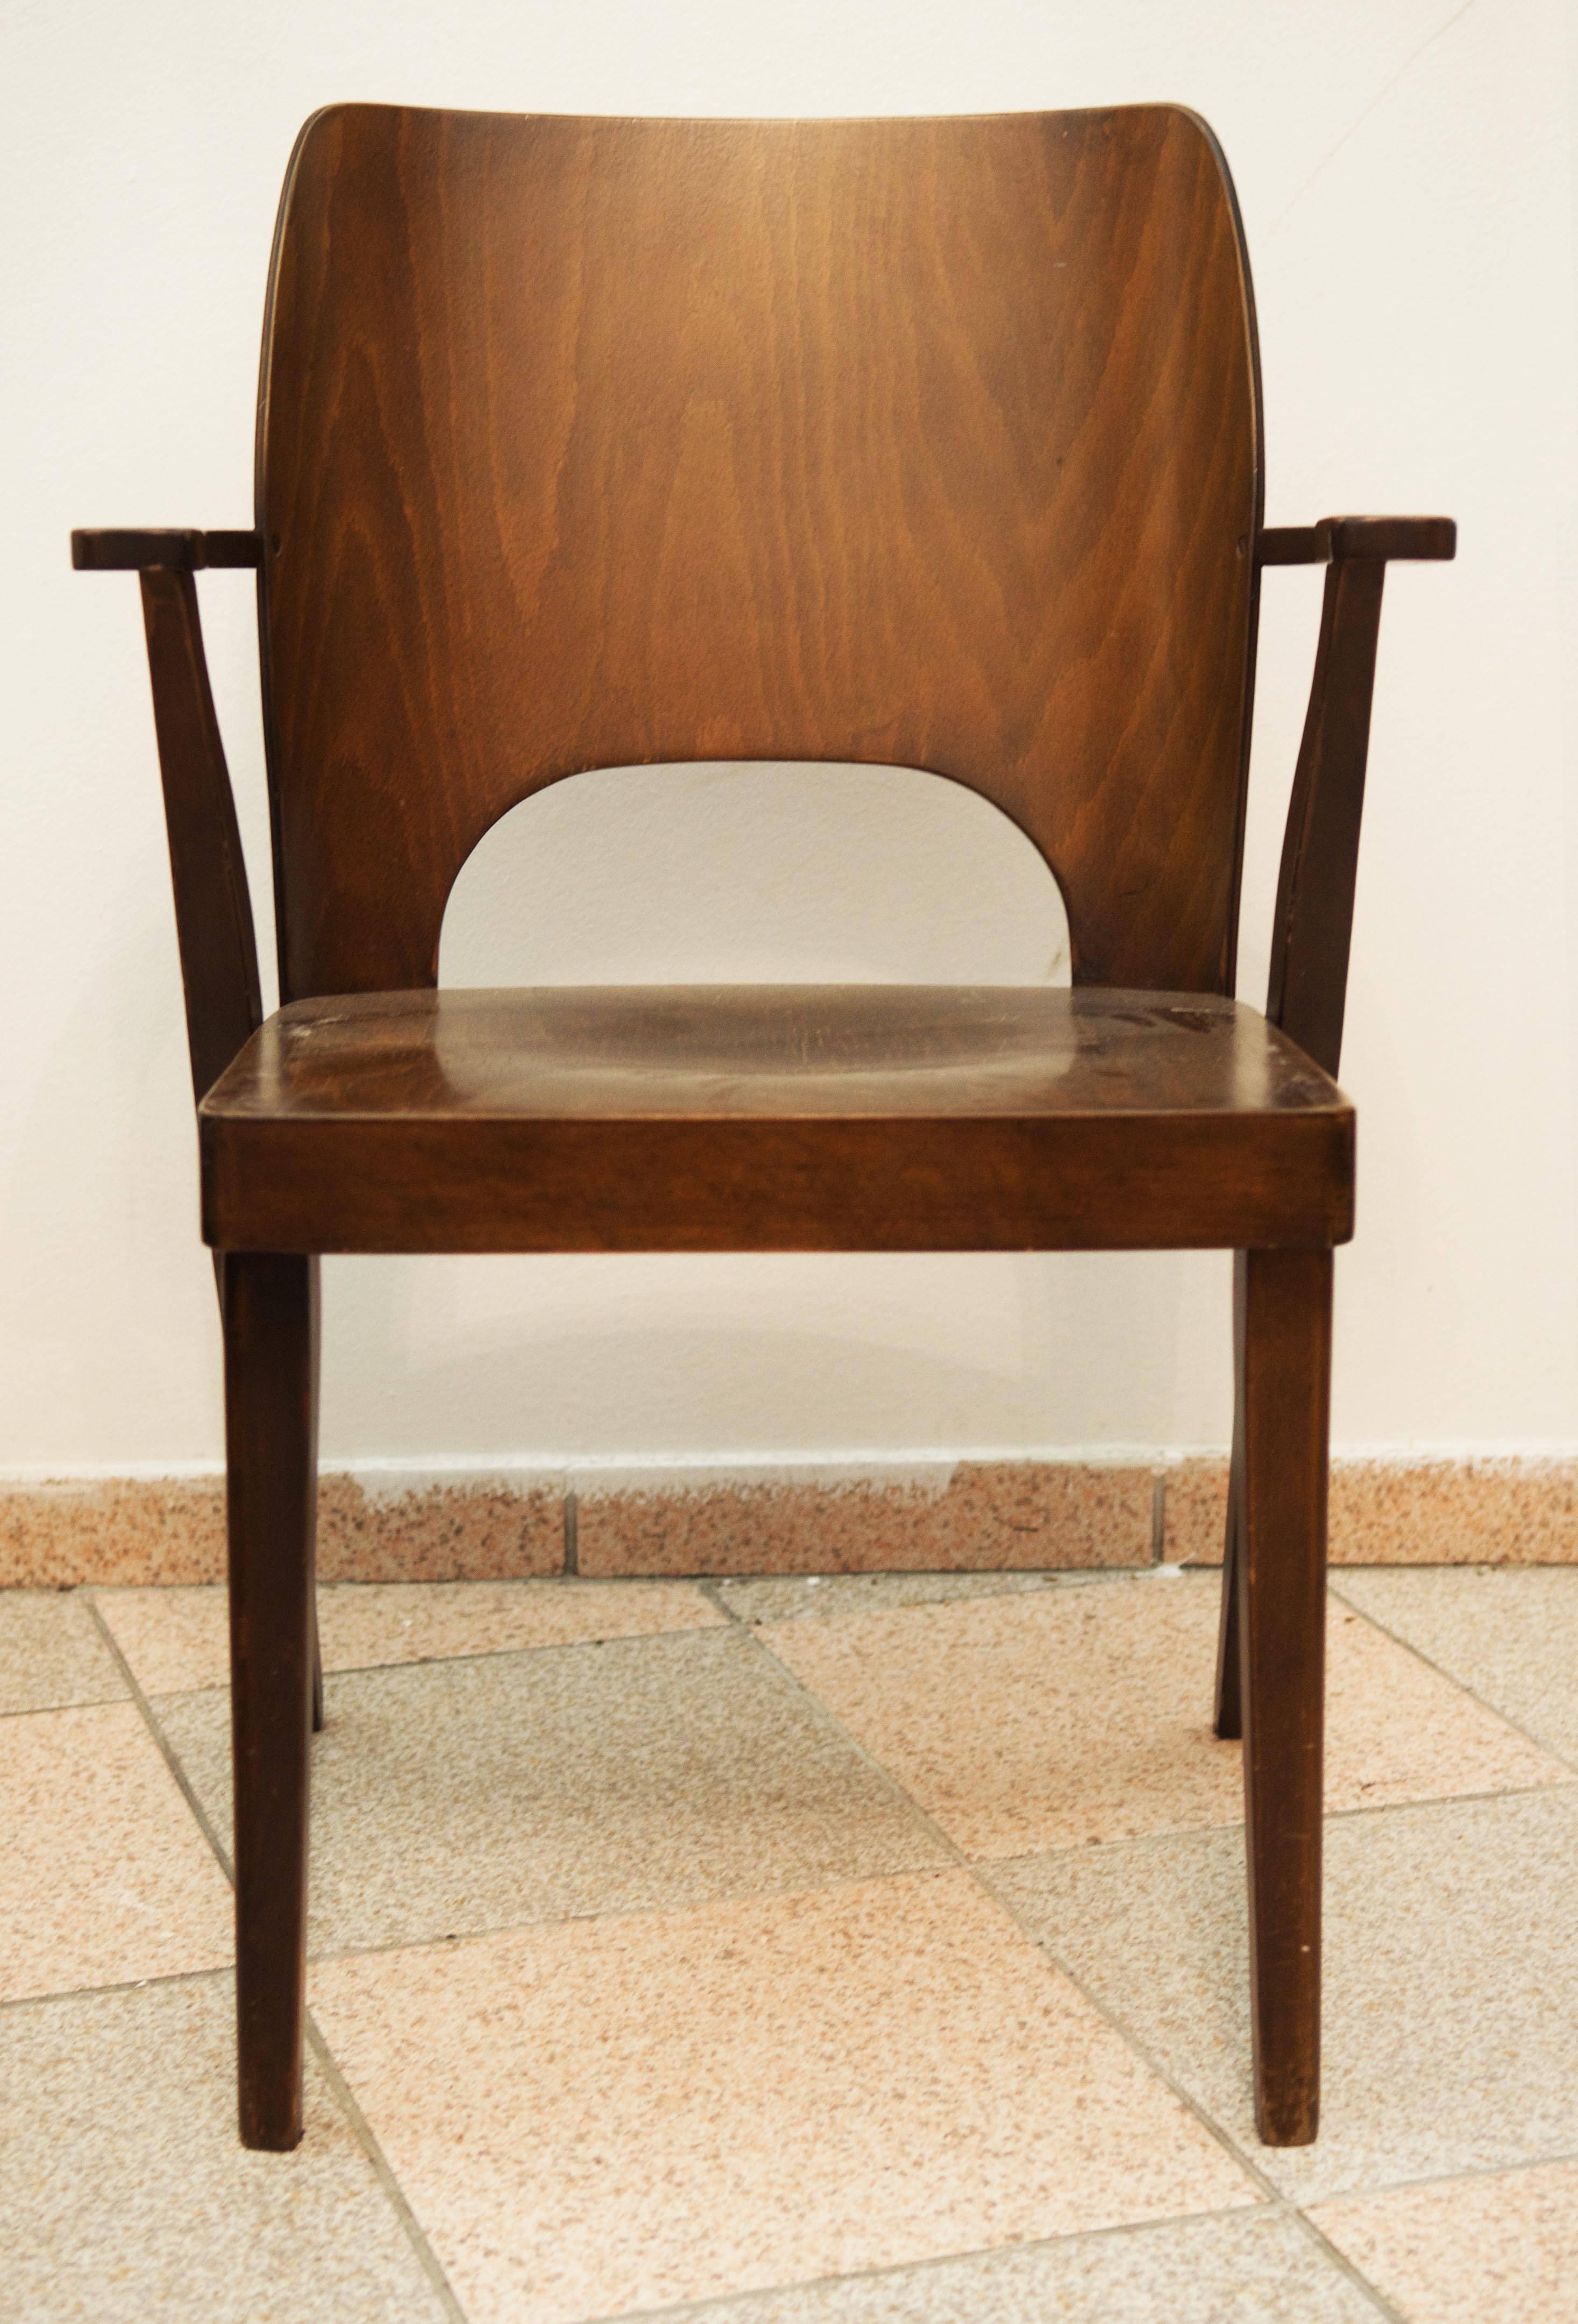 Stacking chair for apartments and lecture halls, with seat and rest made of plywood. The slit in the side frame is used to push through a bar to form a seated row at lectures. 
Made by 